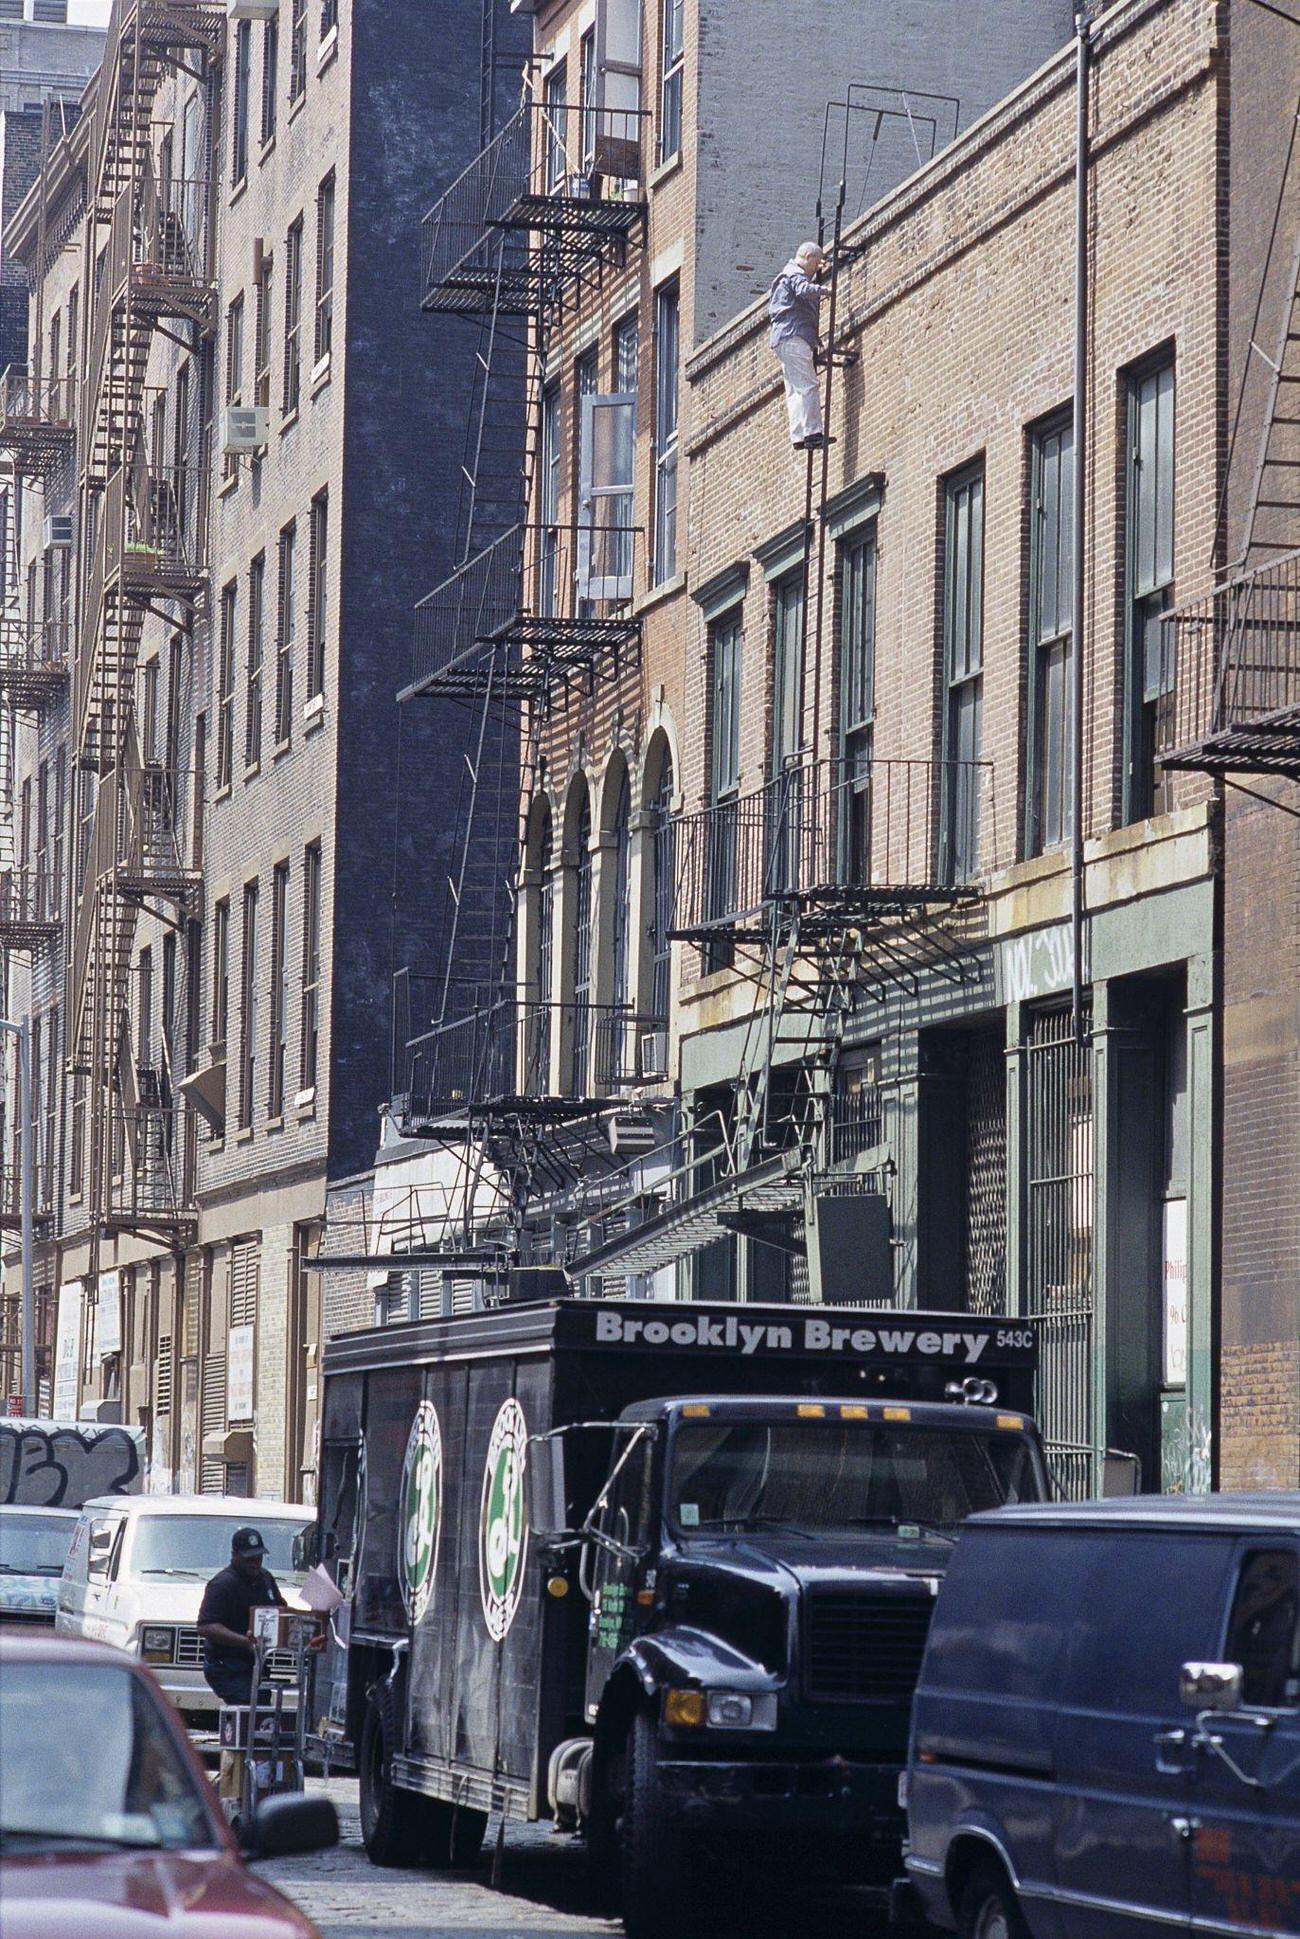 Brooklyn Brewery Truck Parked On Street, 1990S